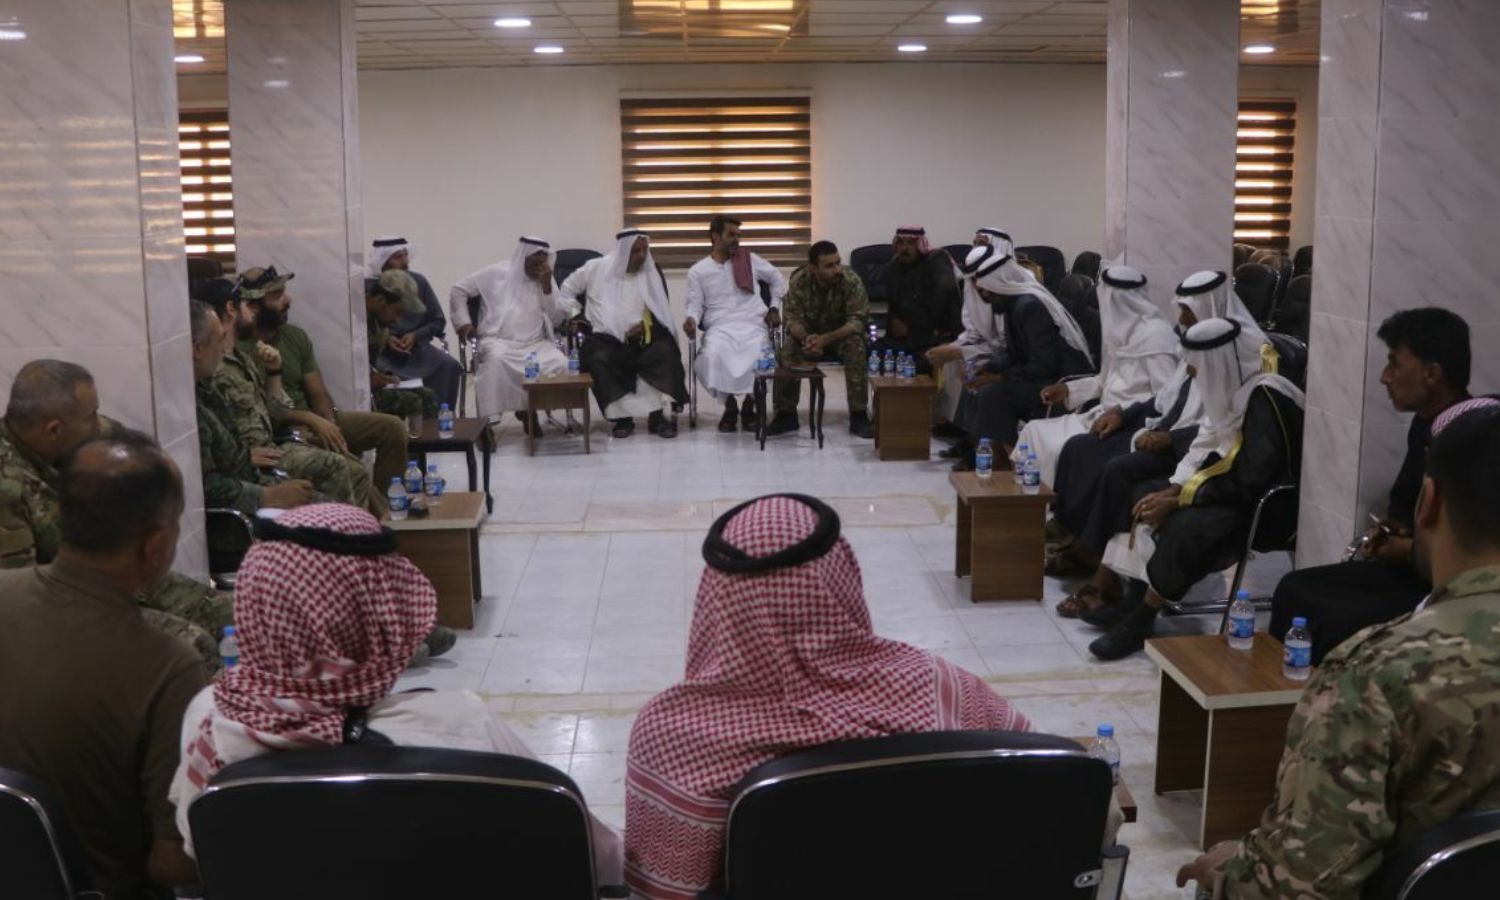 Representatives of the US-led International Coalition during their meeting with representatives of the security forces and tribal figures and notables in Deir Ezzor - 25 June 2021 (Deir Ezzor Media Center/Facebook)